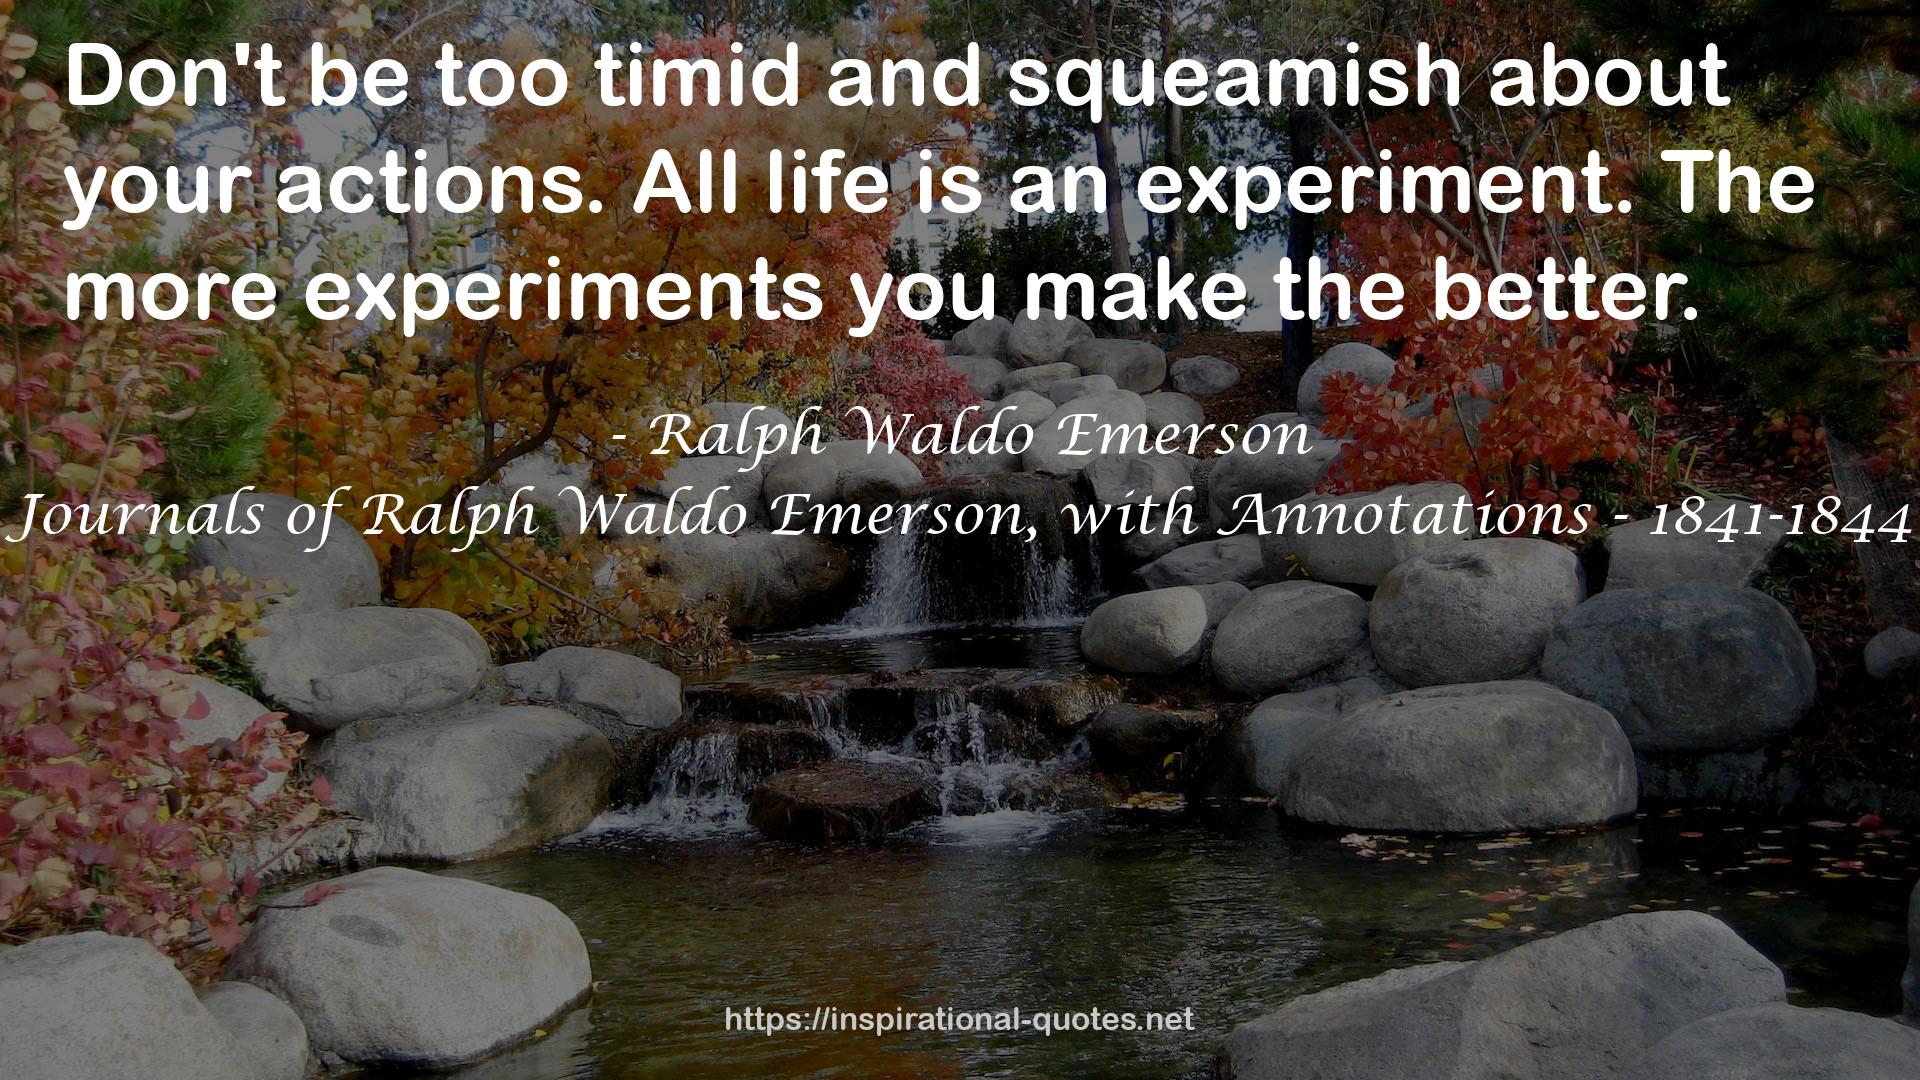 Journals of Ralph Waldo Emerson, with Annotations - 1841-1844 QUOTES